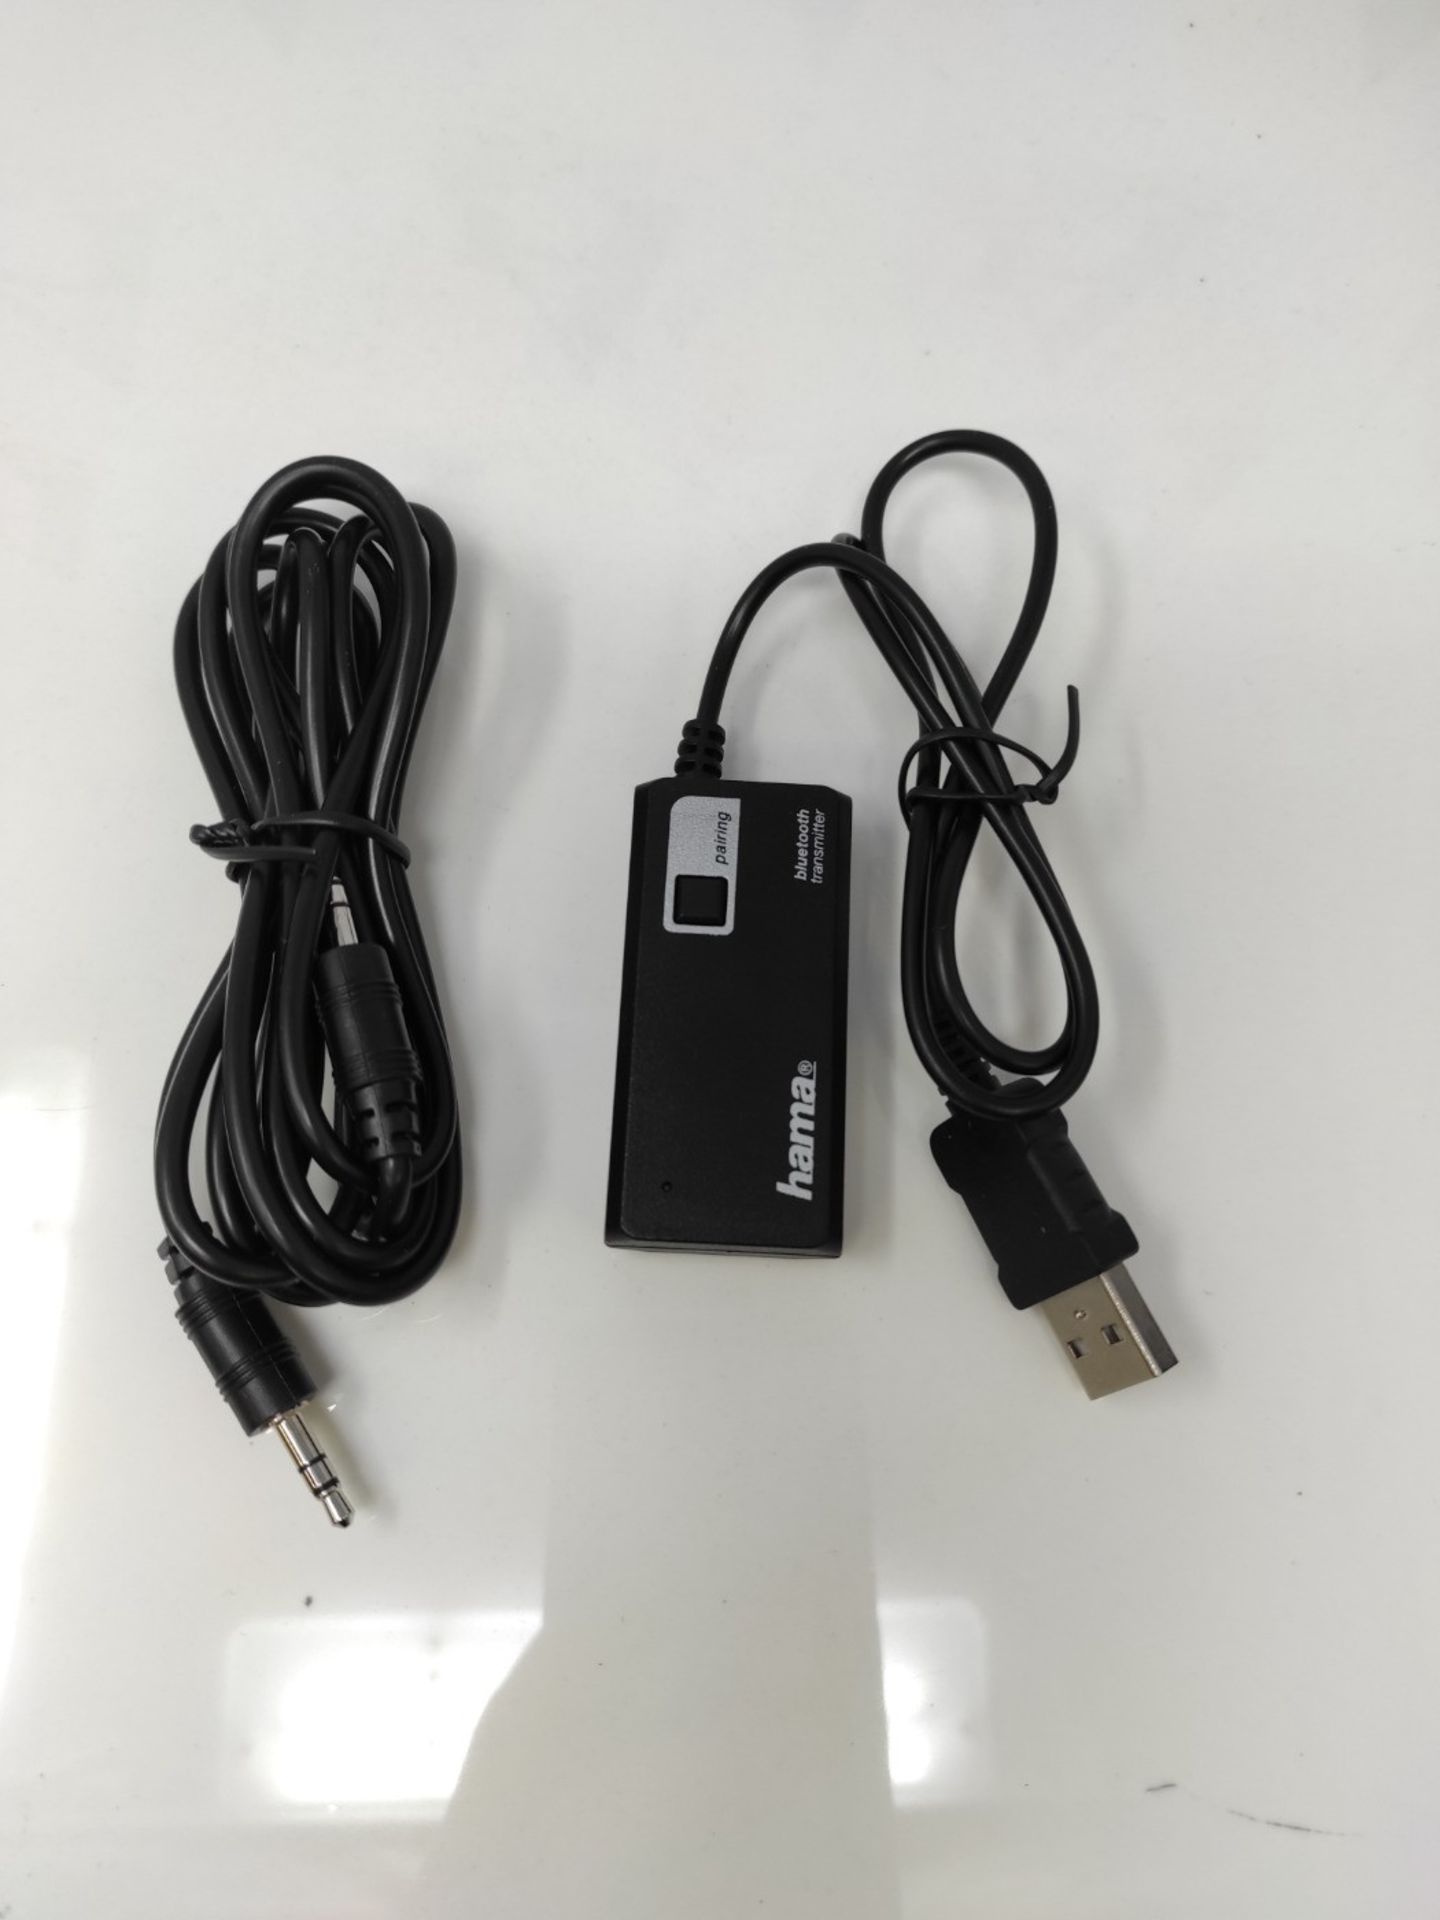 Hama Bluetooth audio transmitter Twin (receiver adapter for simultaneous transmission - Image 3 of 3